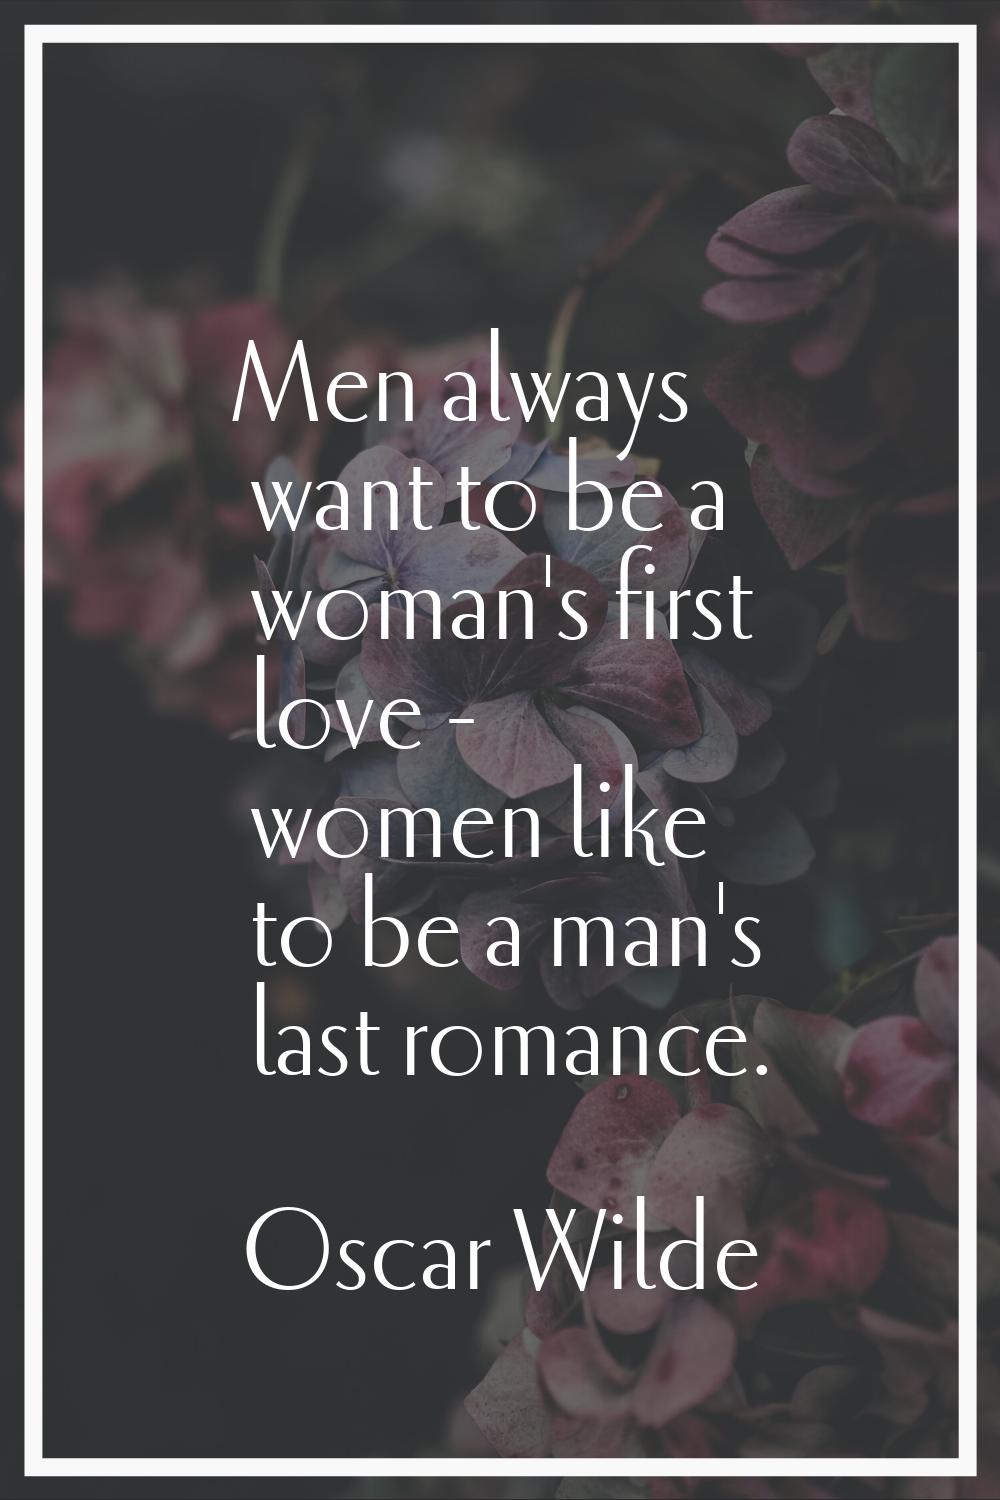 Men always want to be a woman's first love - women like to be a man's last romance.